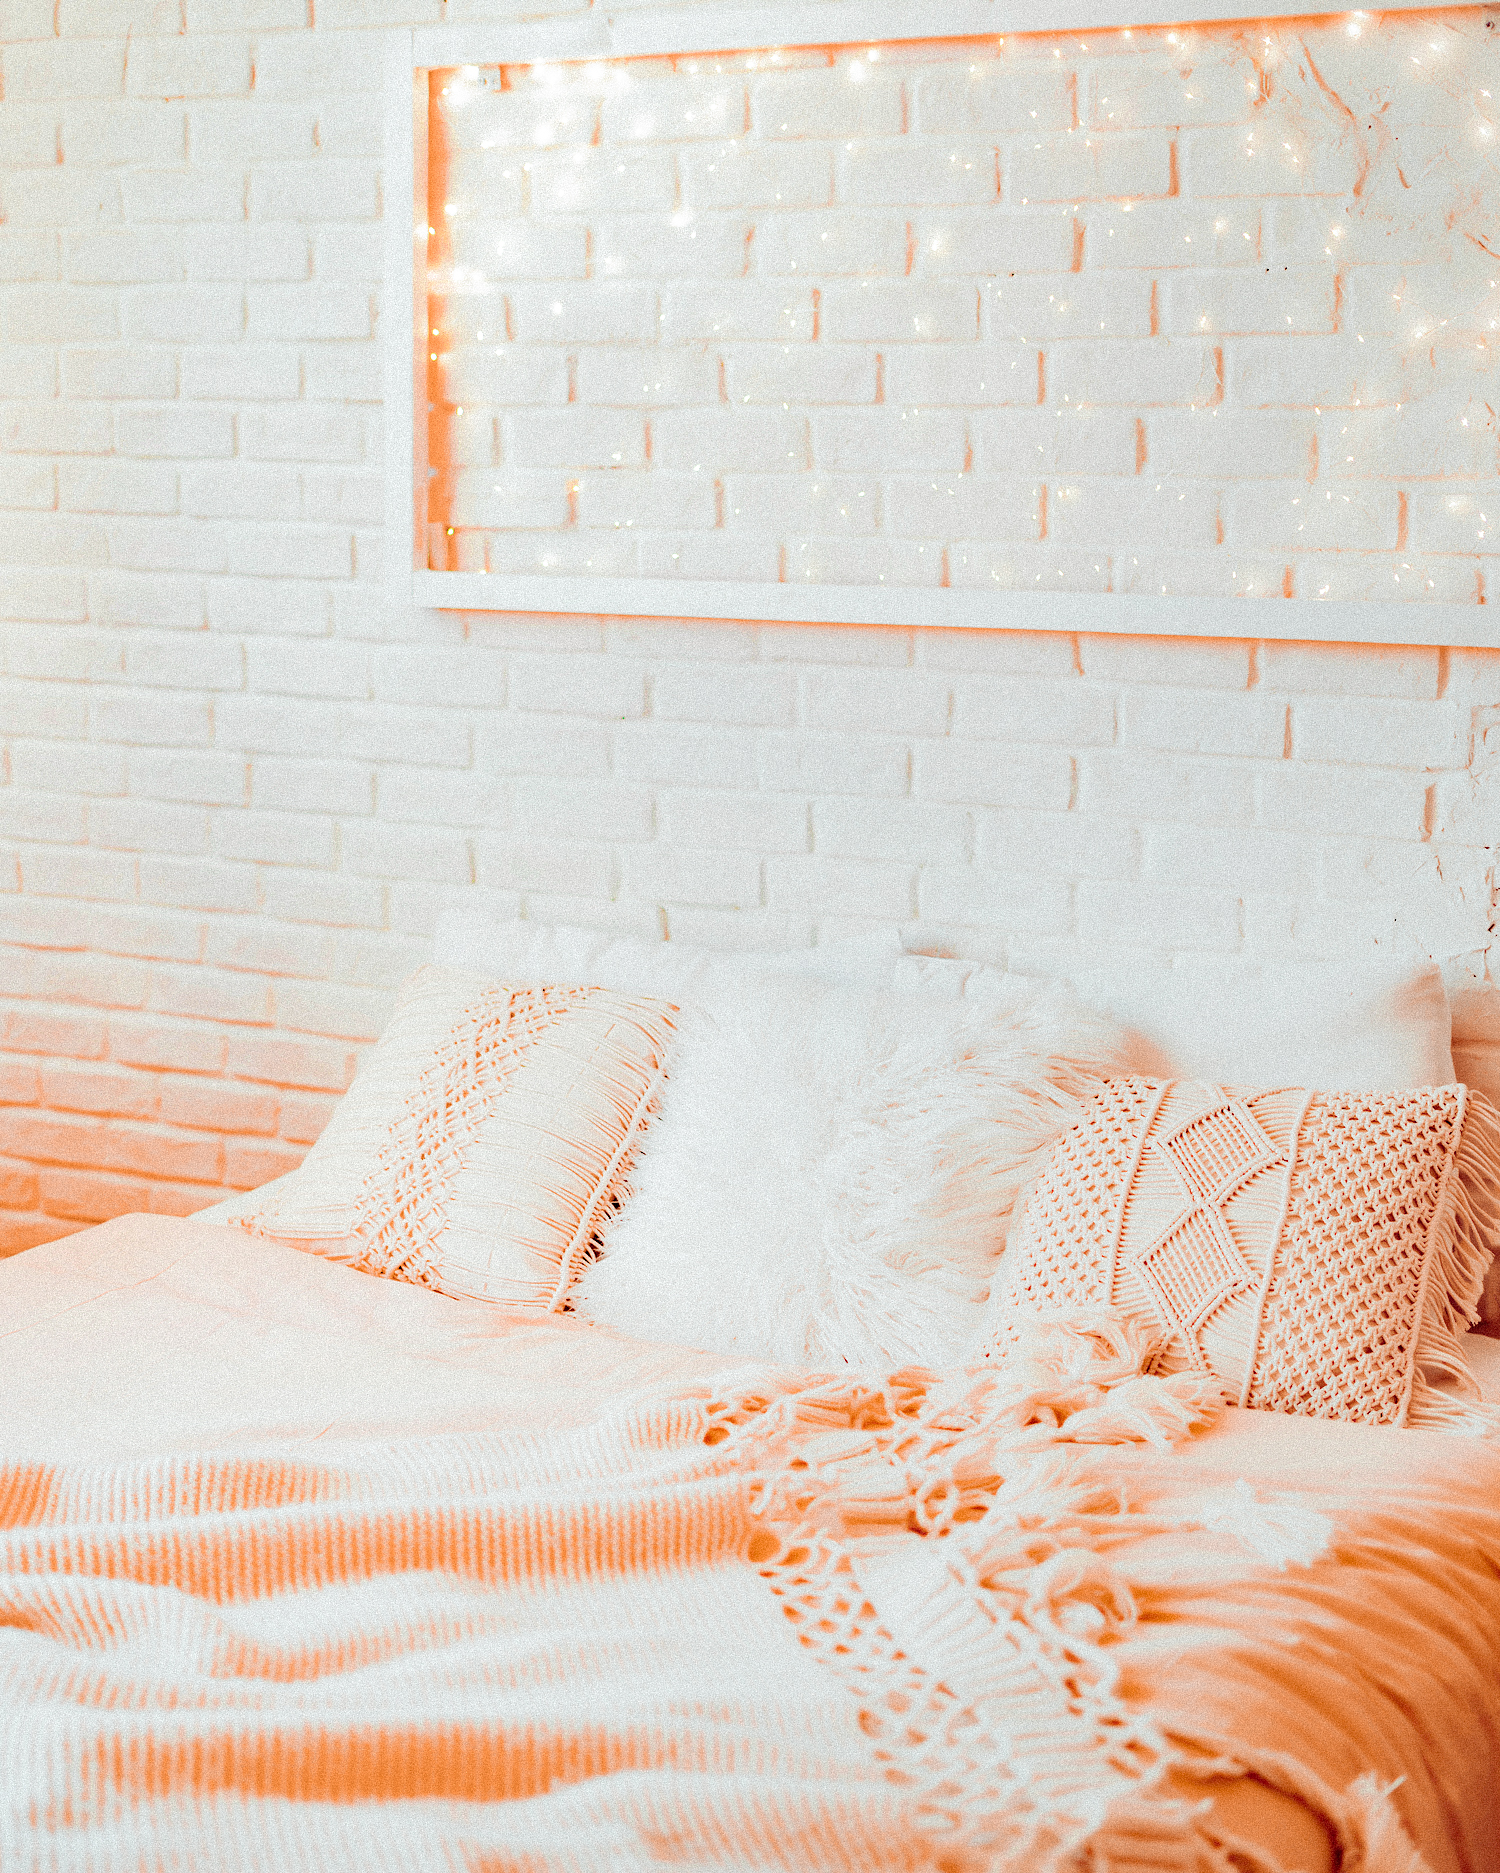 Light panel made of garlands in a white frame above the bed. Cozy modern bright bedroom. Winter Christmas interior.